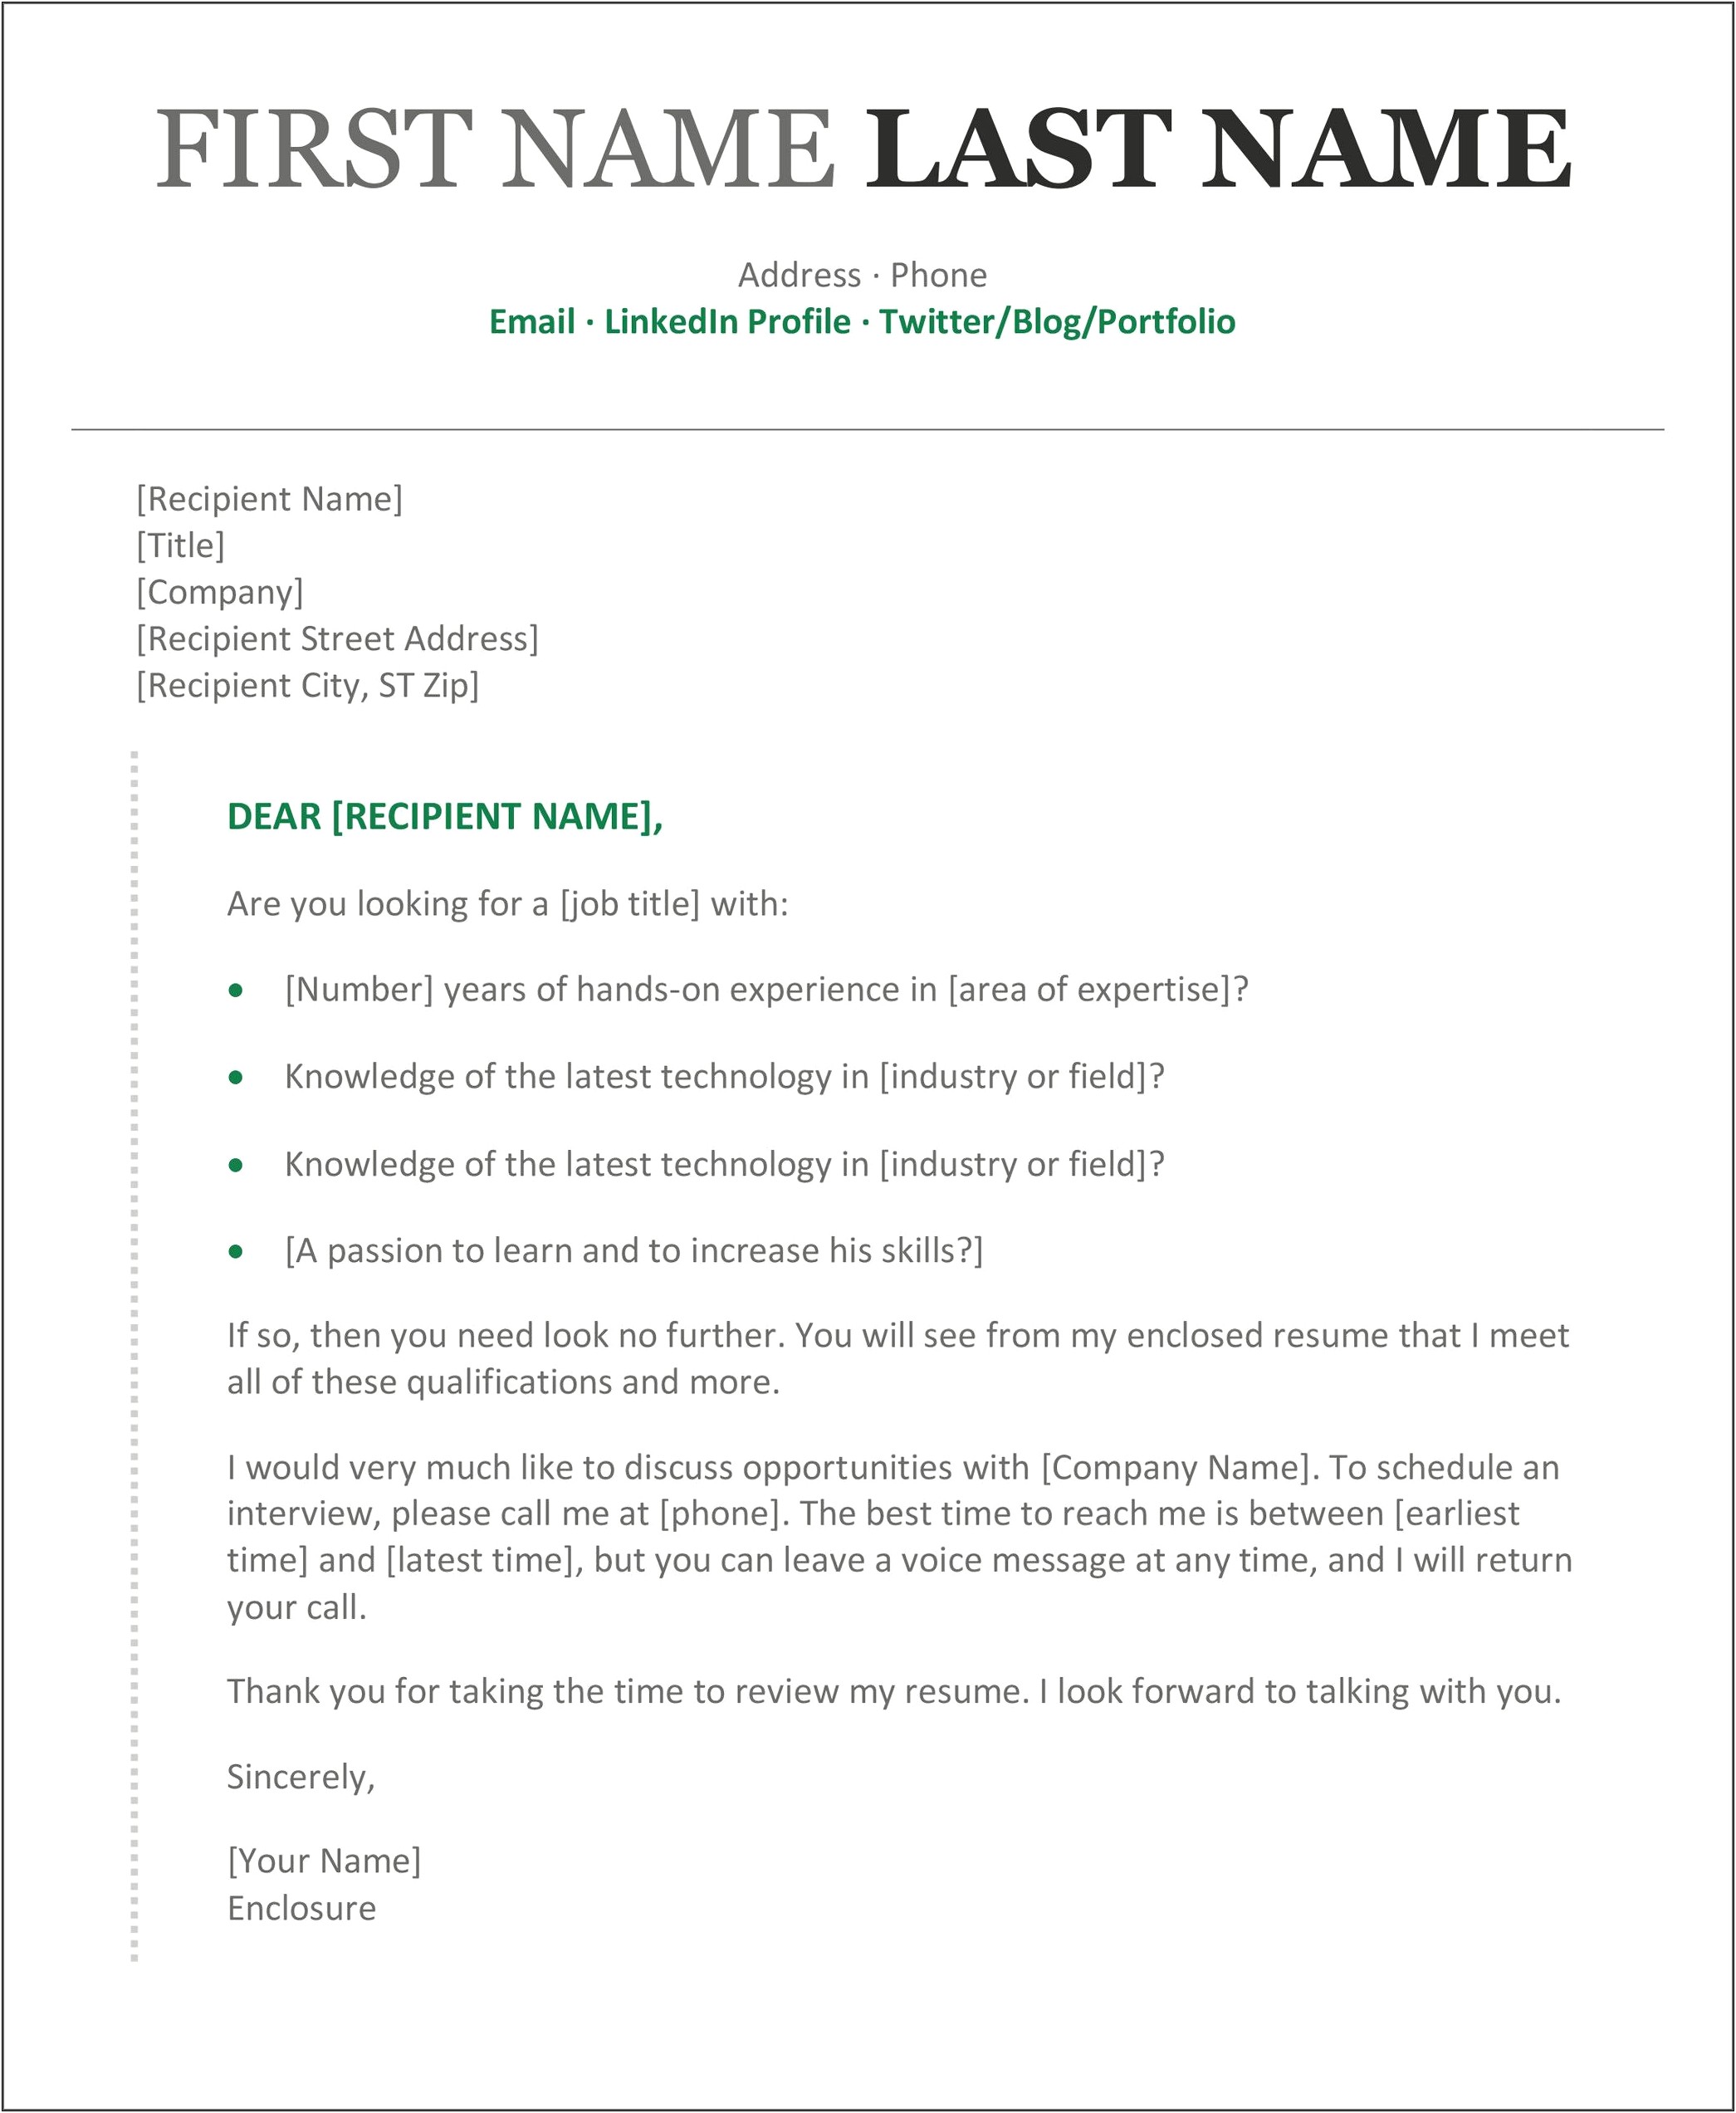 Sample Letter To Accompany Resume